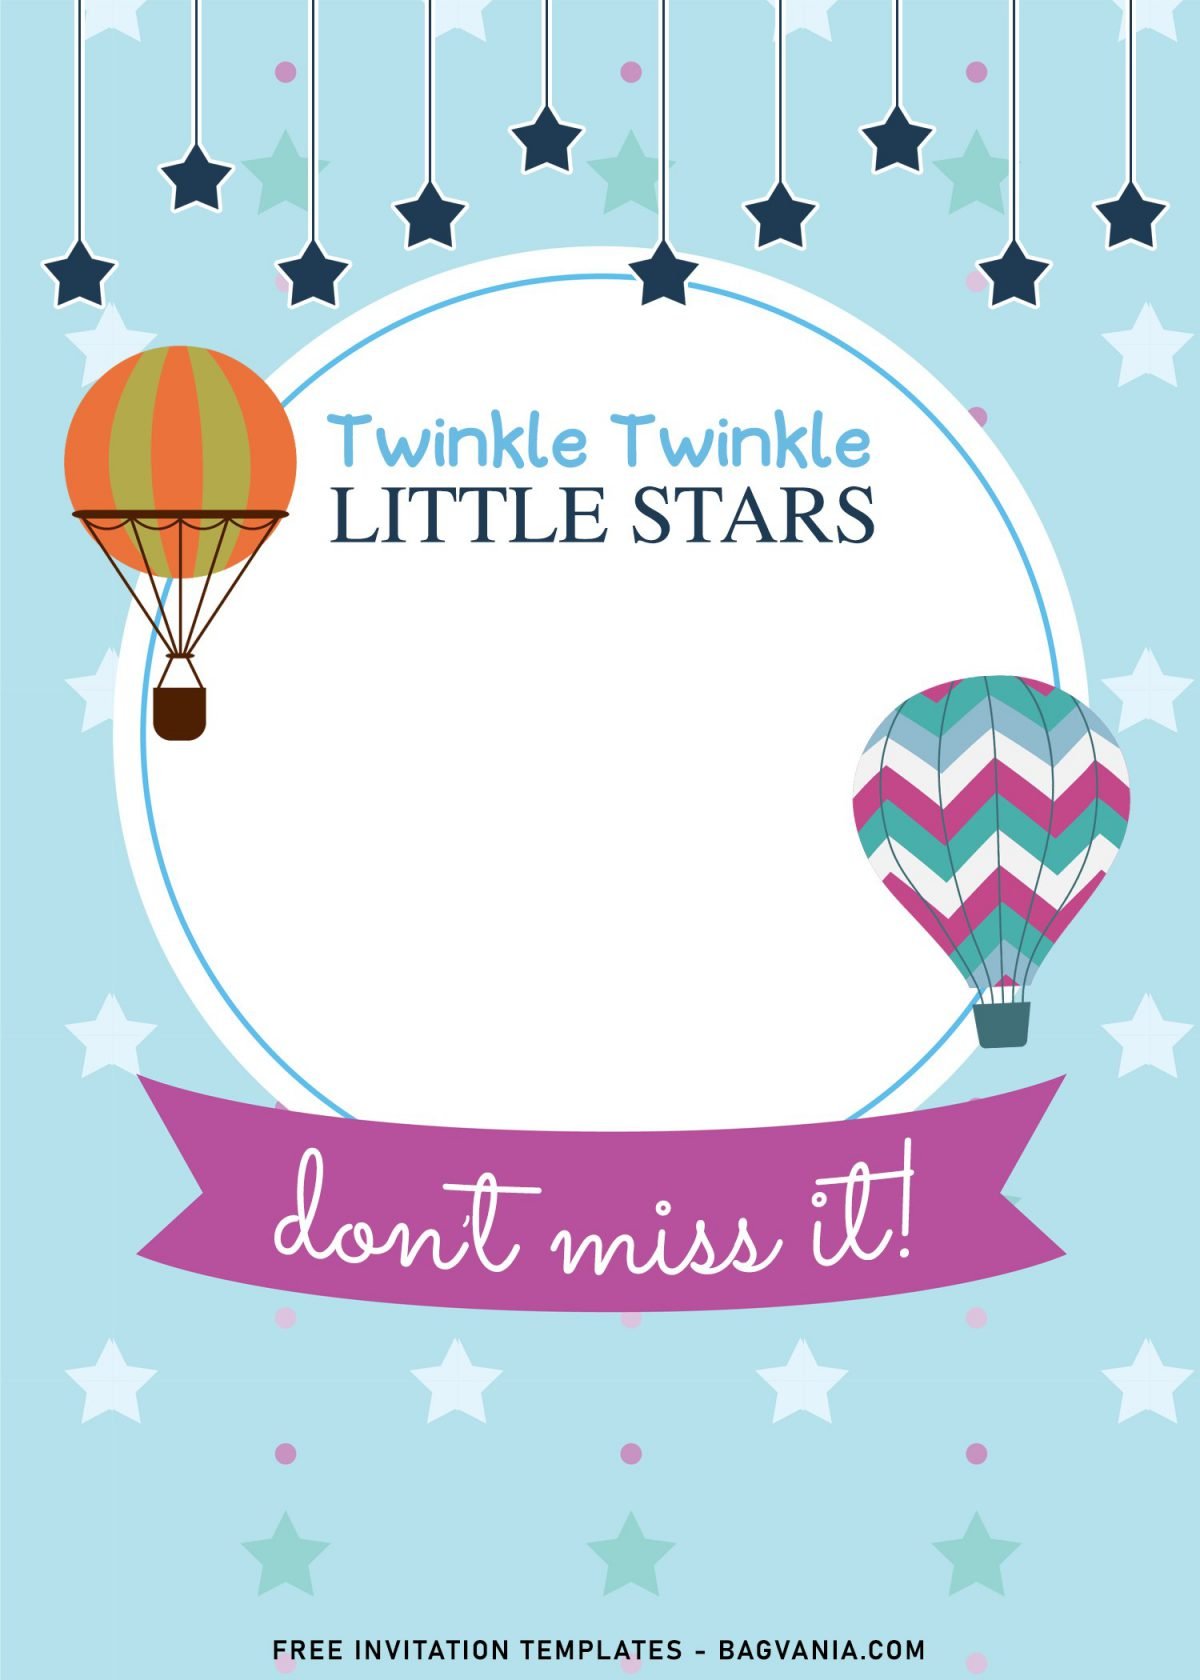 7+ Twinkle Twinkle Little Stars Birthday Invitation Templates For Any Ages and has Blue Sky Background and White stars